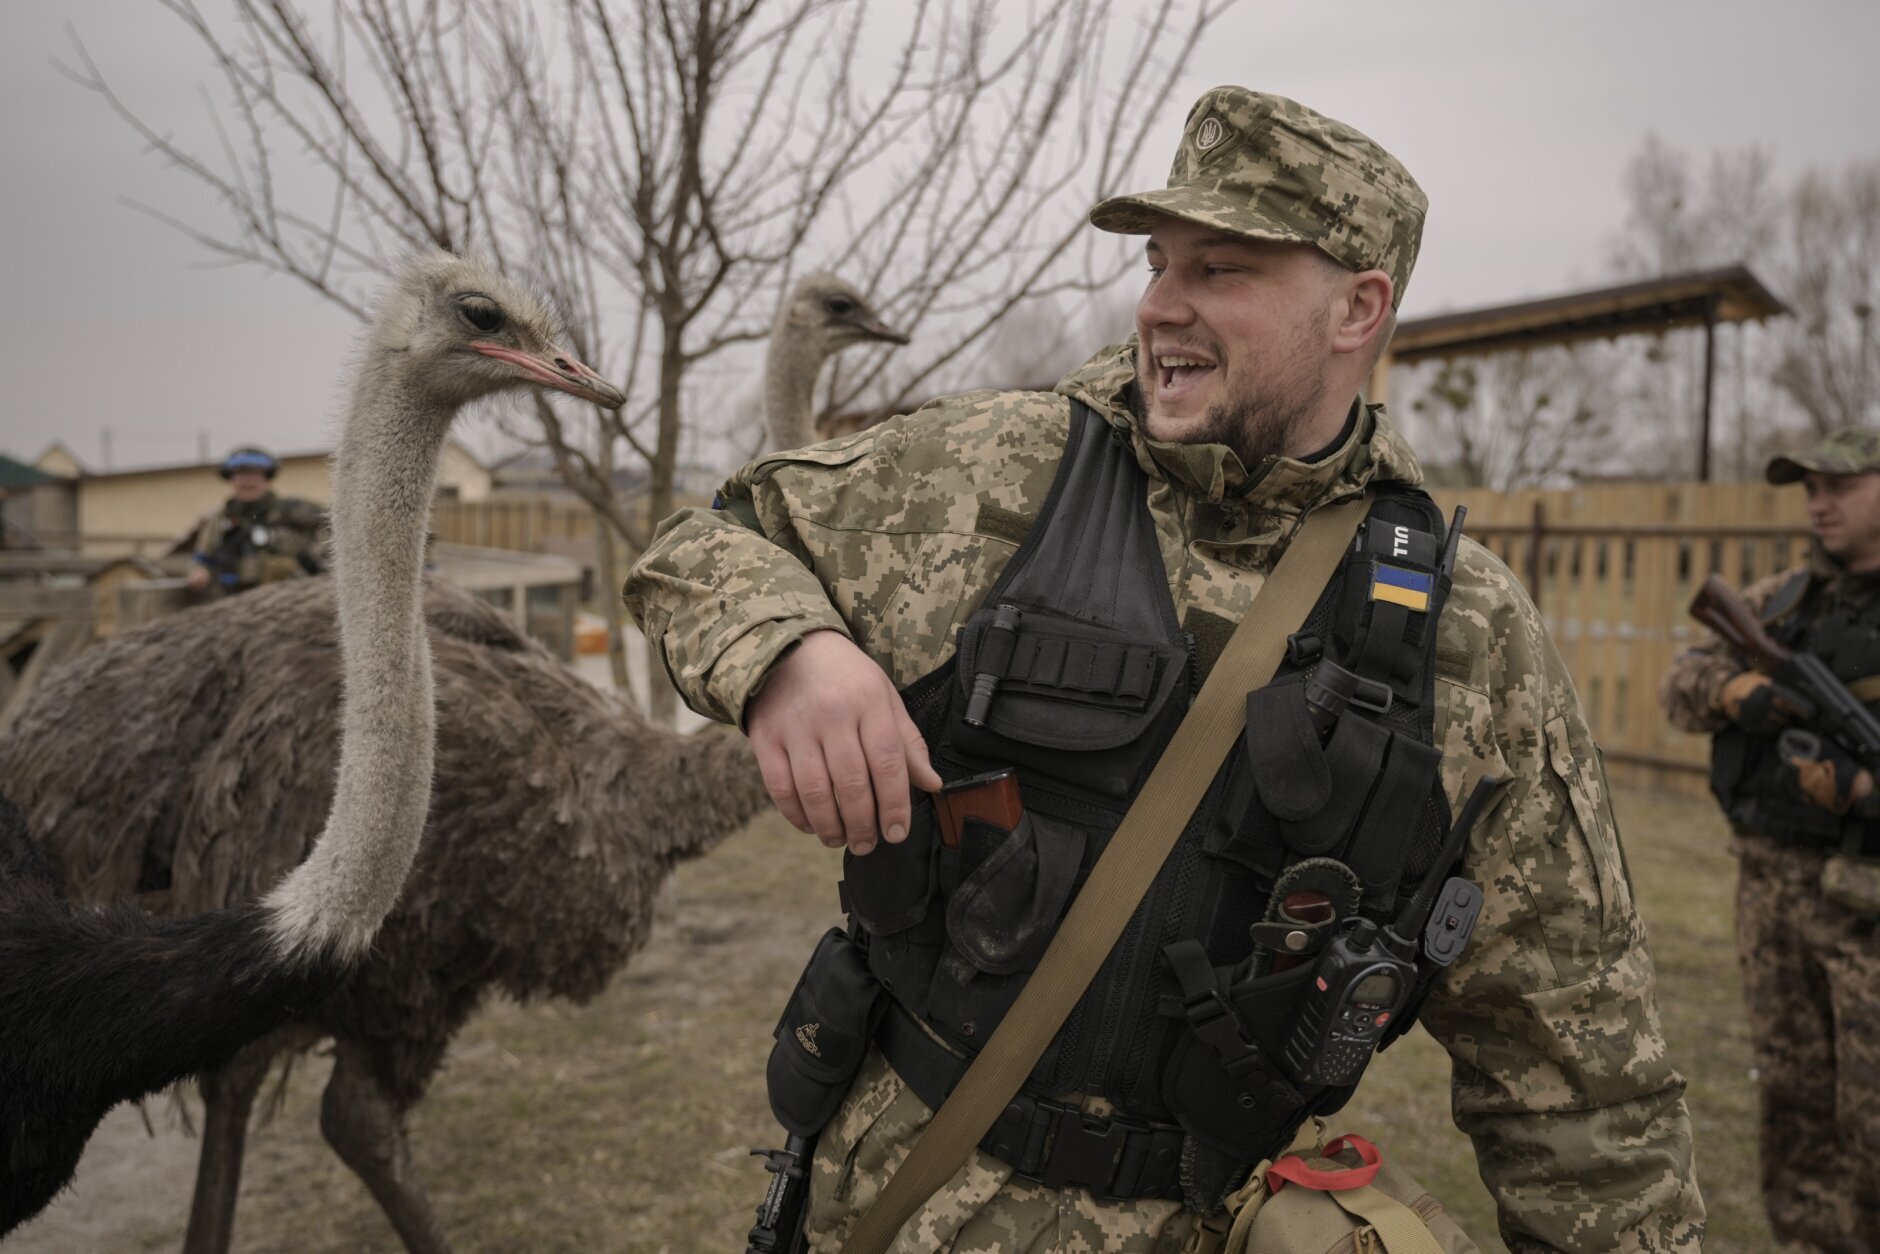 A Ukrainian serviceman tries to avoid being bitten by an ostrich at a heavily damaged private zoo as soldiers and volunteers attempted to evacuate the surviving animals to safety in the village of Yasnohorodka, on the outskirts of Kyiv, Ukraine, Wednesday, March 30, 2022. The evacuation was halted before completion as shelling resumed between Russian and Ukrainian forces in the area.(AP Photo/Vadim Ghirda)